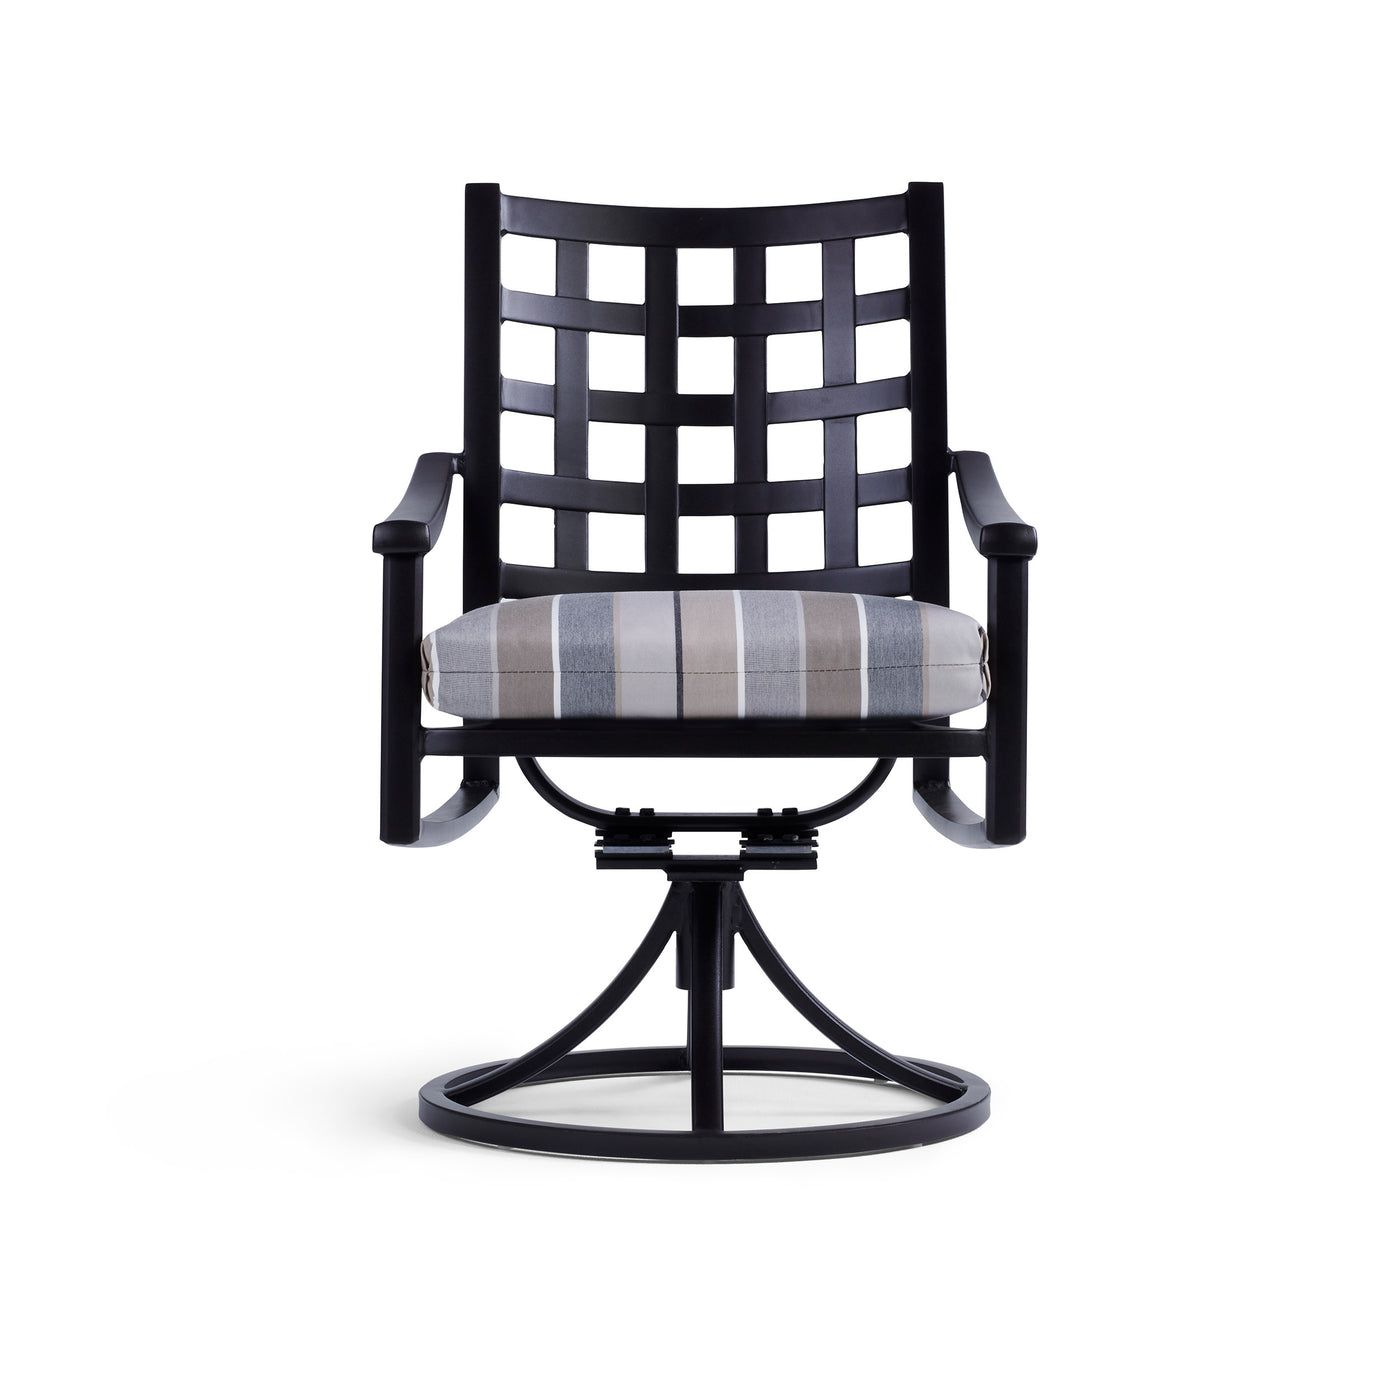  Yardbird Lily Outdoor Dining Swivel Chair Outdoor Furniture